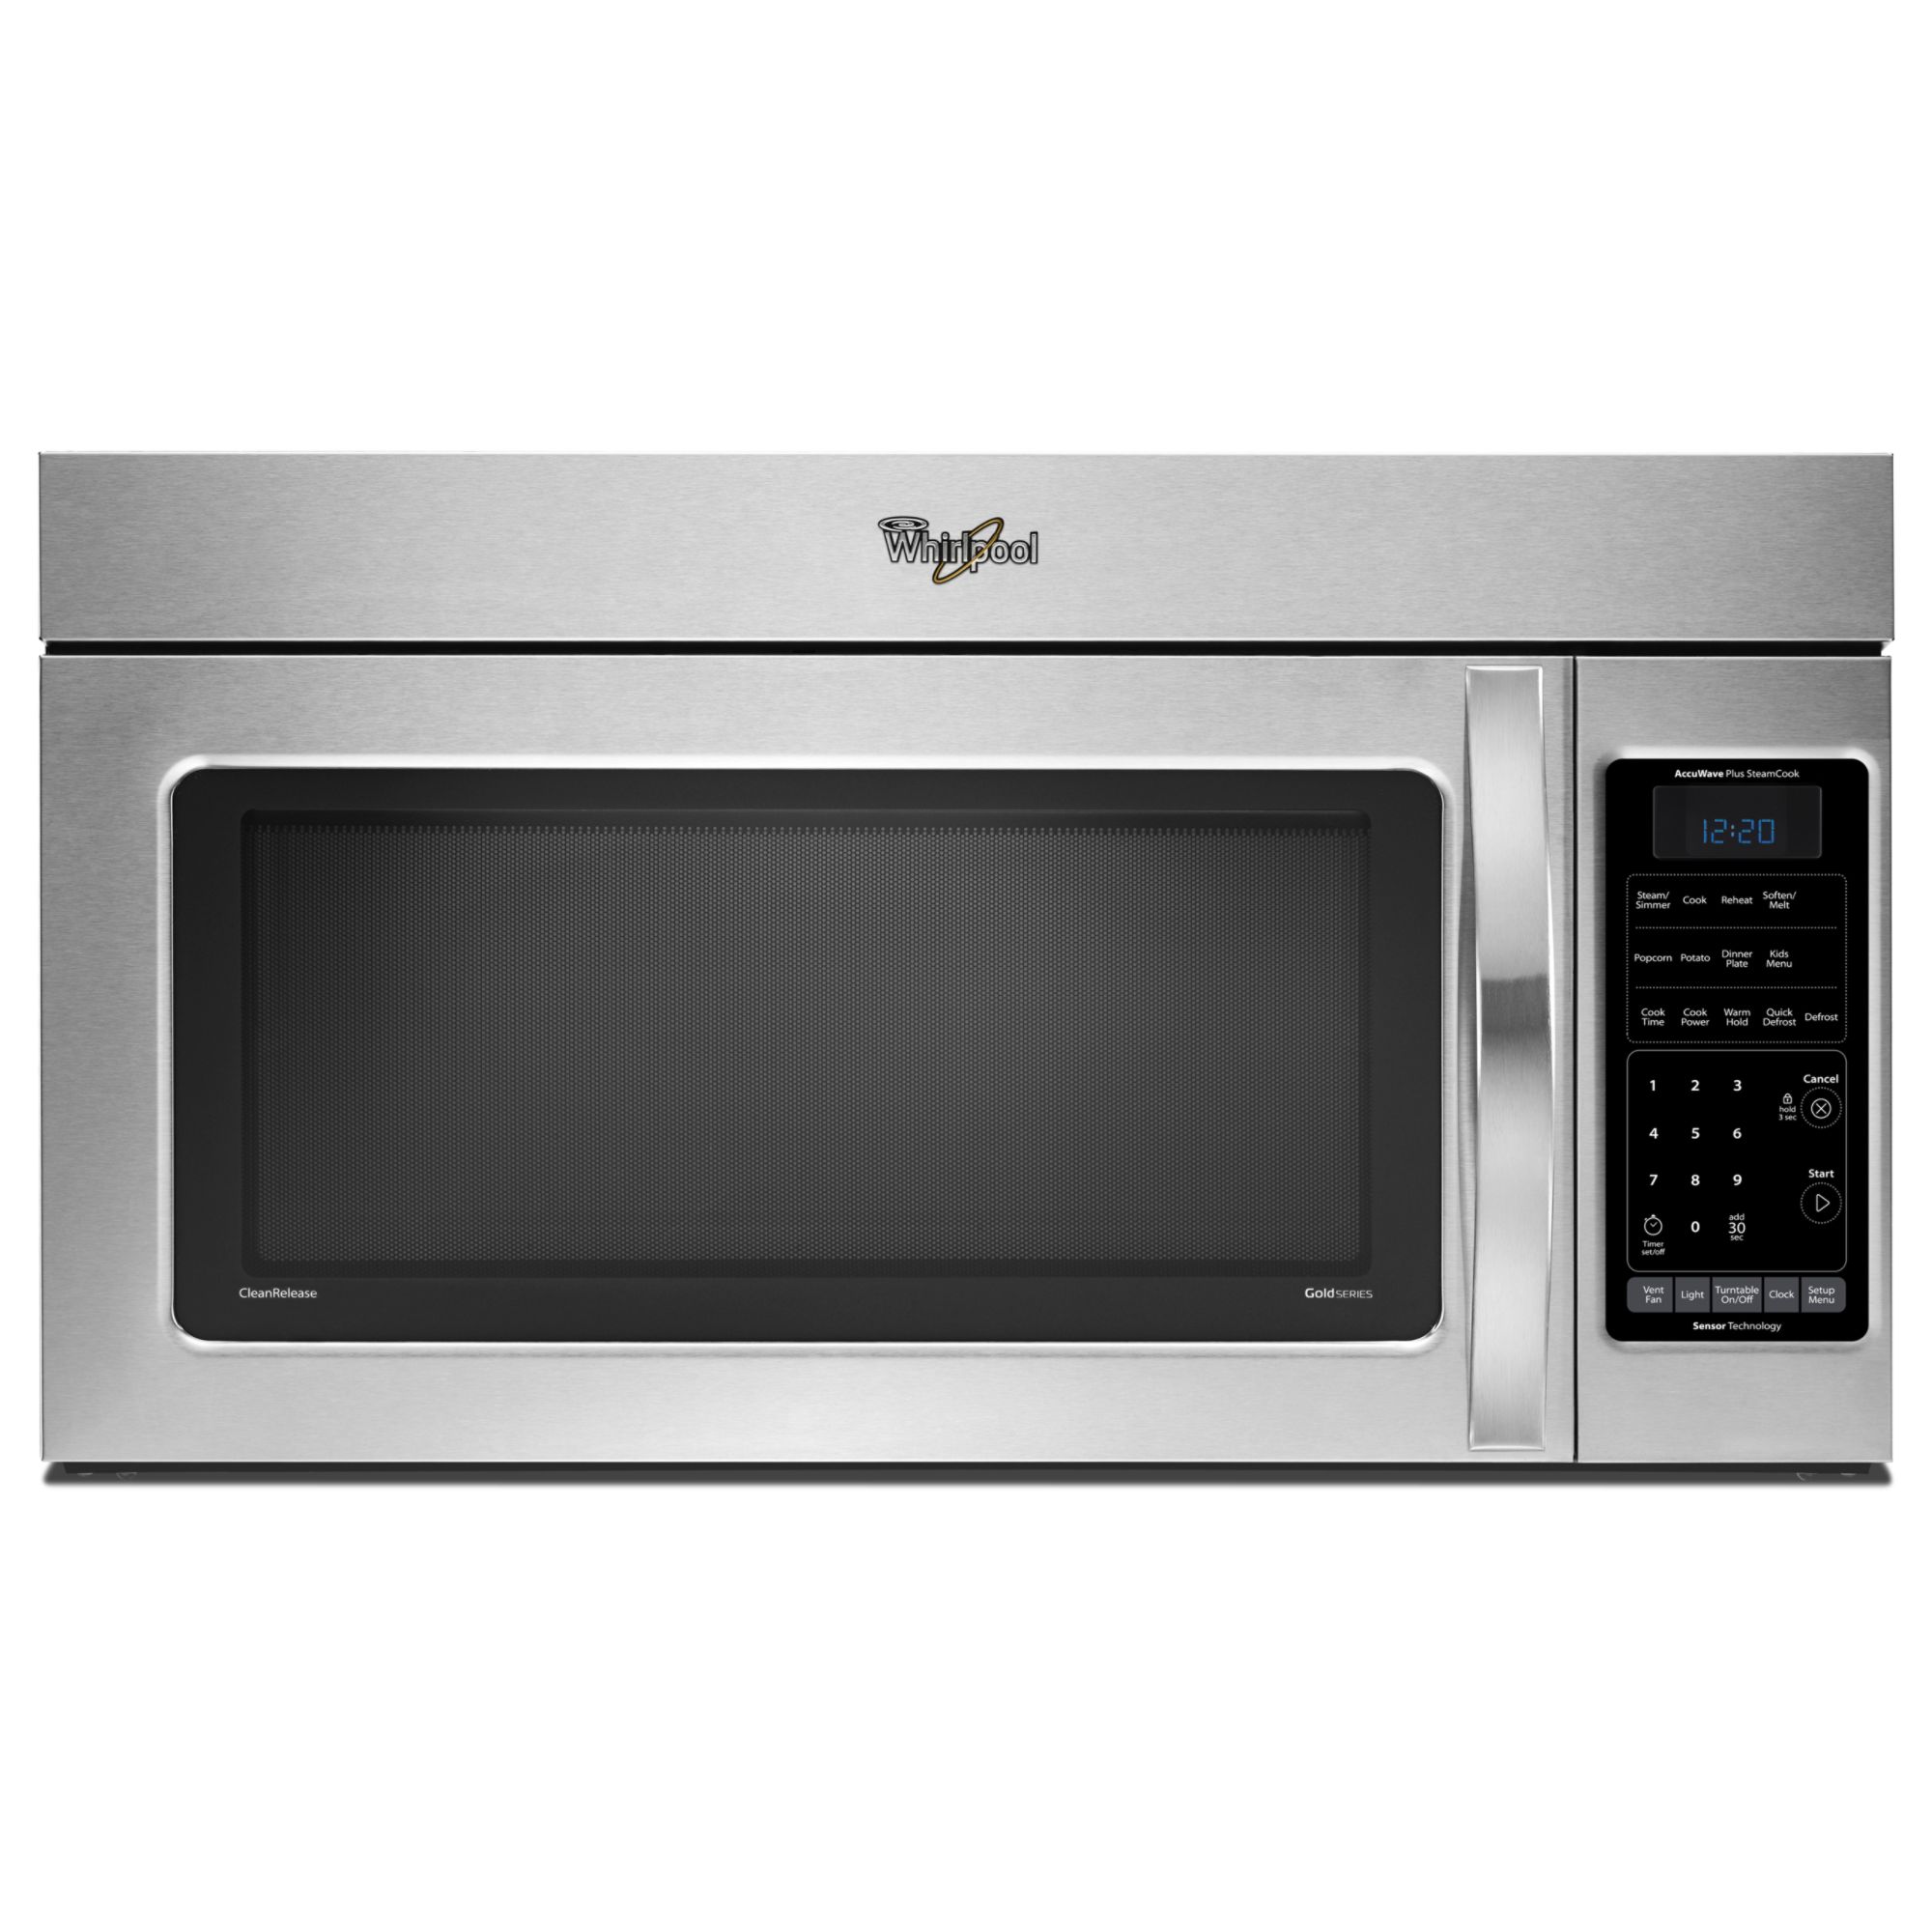 Whirlpool 2.0 cu. ft. Over-the-Range Microwave w/ AccuWave Power System - Stainless Steel